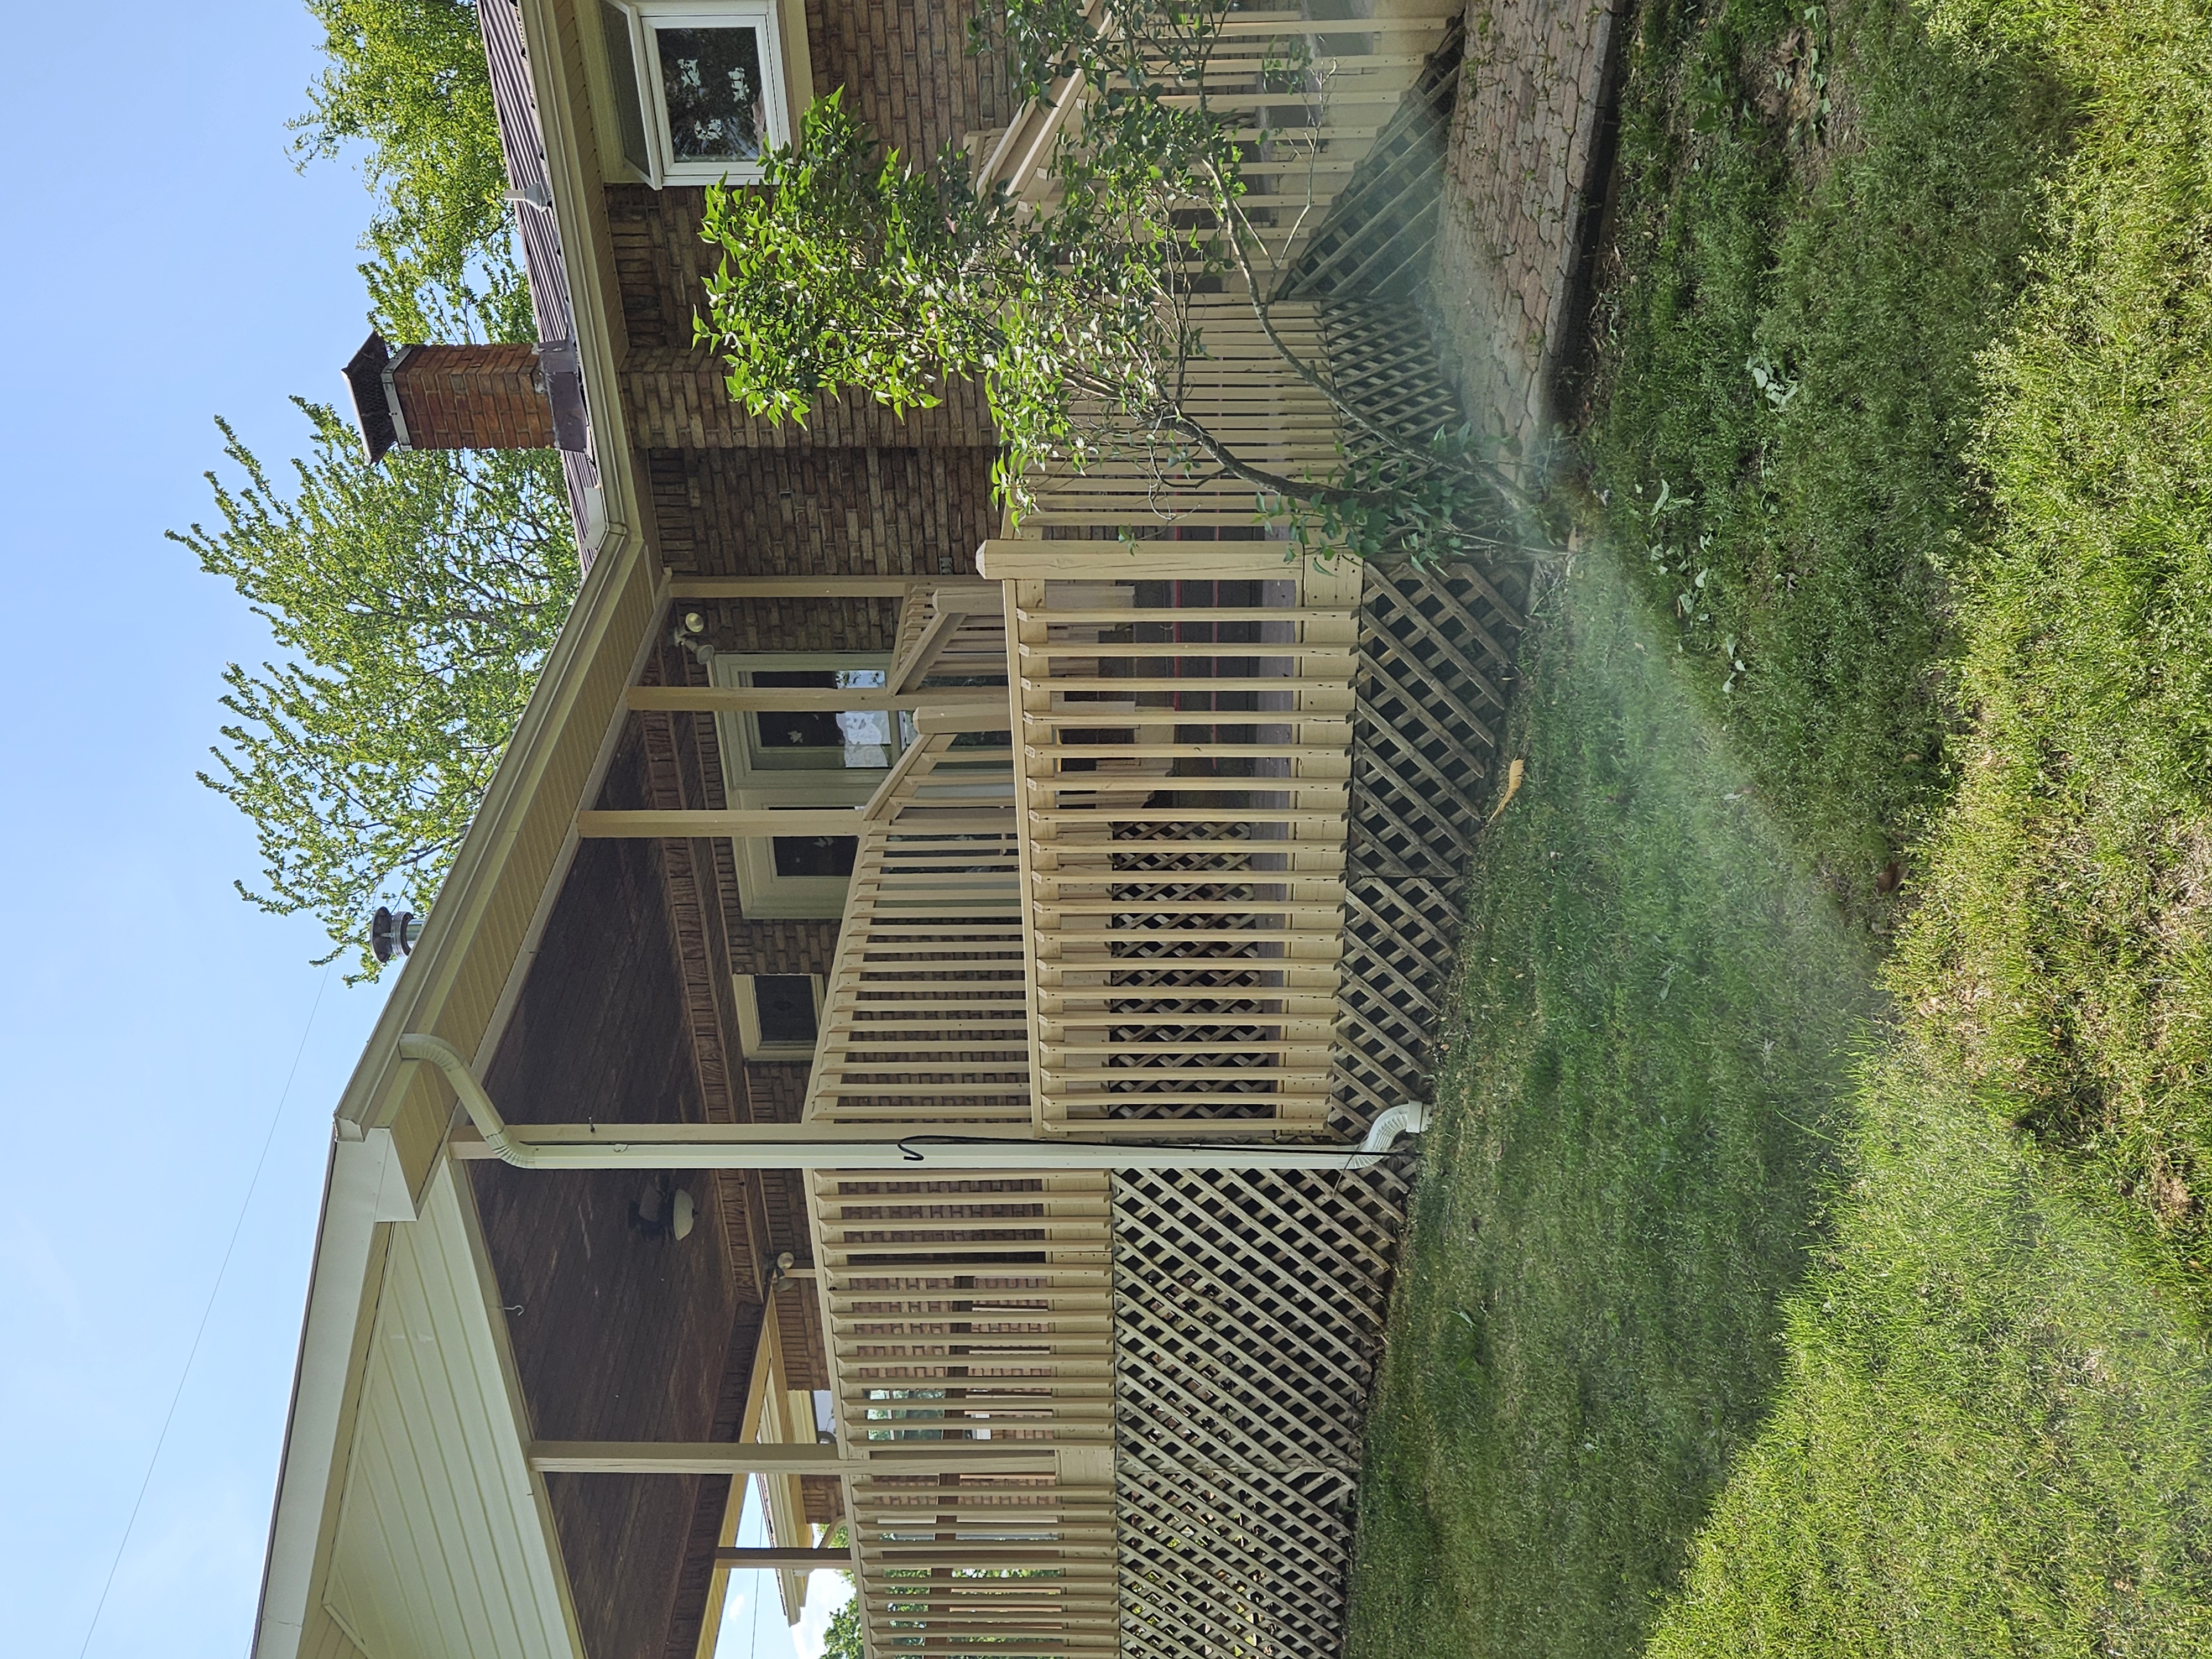 Supreme Quality Pressure washing this home in Centerville, TN